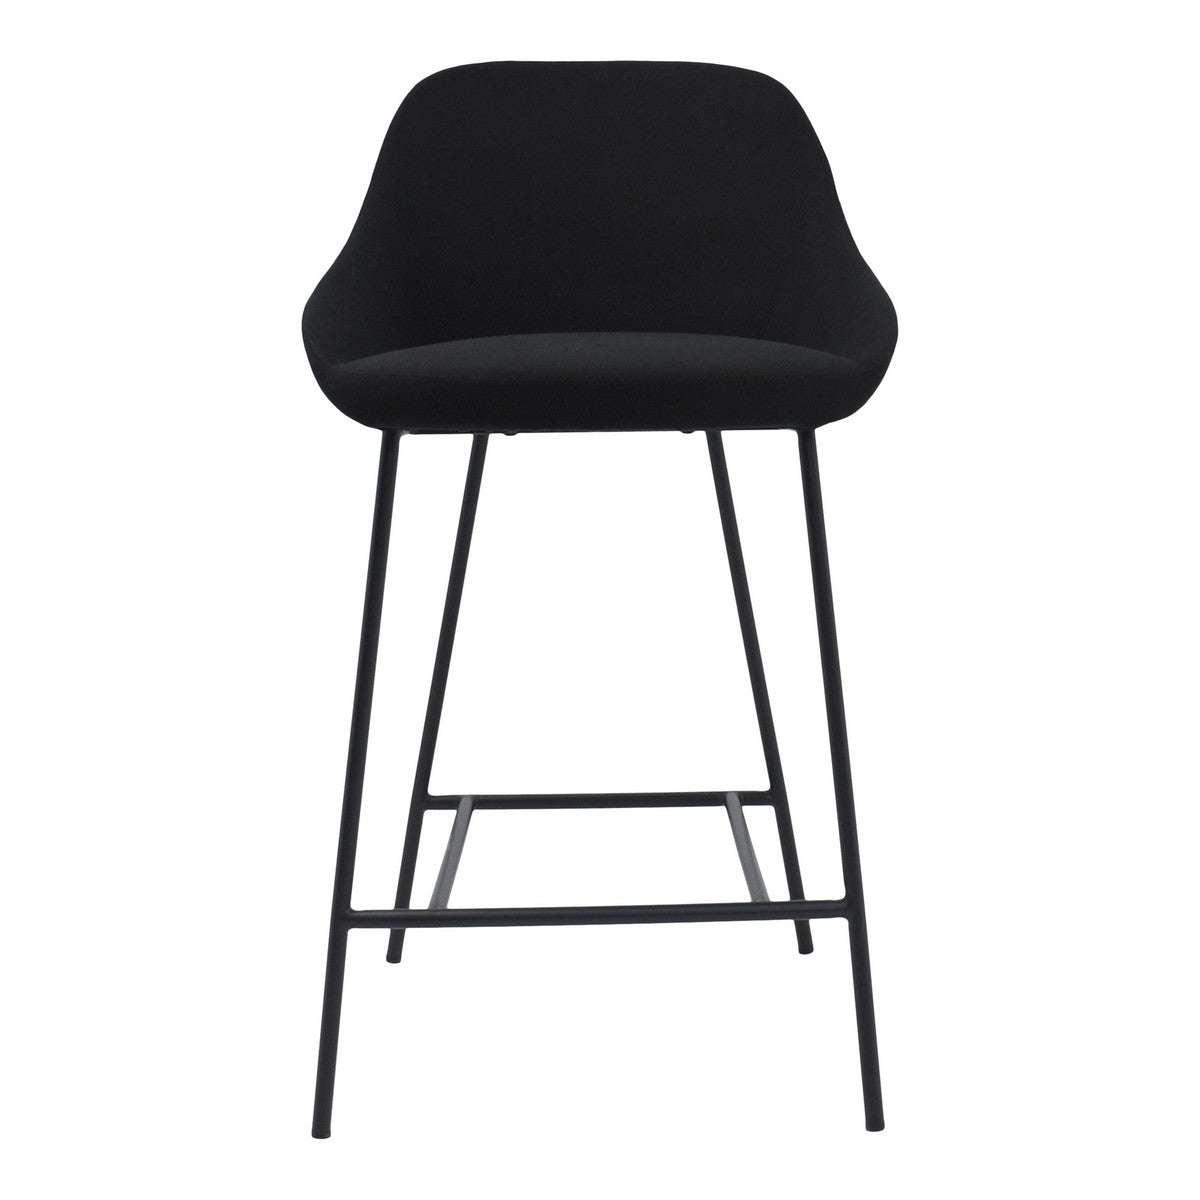 Moe's Home Collection Shelby Counter Stool Black - EJ-1038-02 - Moe's Home Collection - Counter Stools - Minimal And Modern - 1